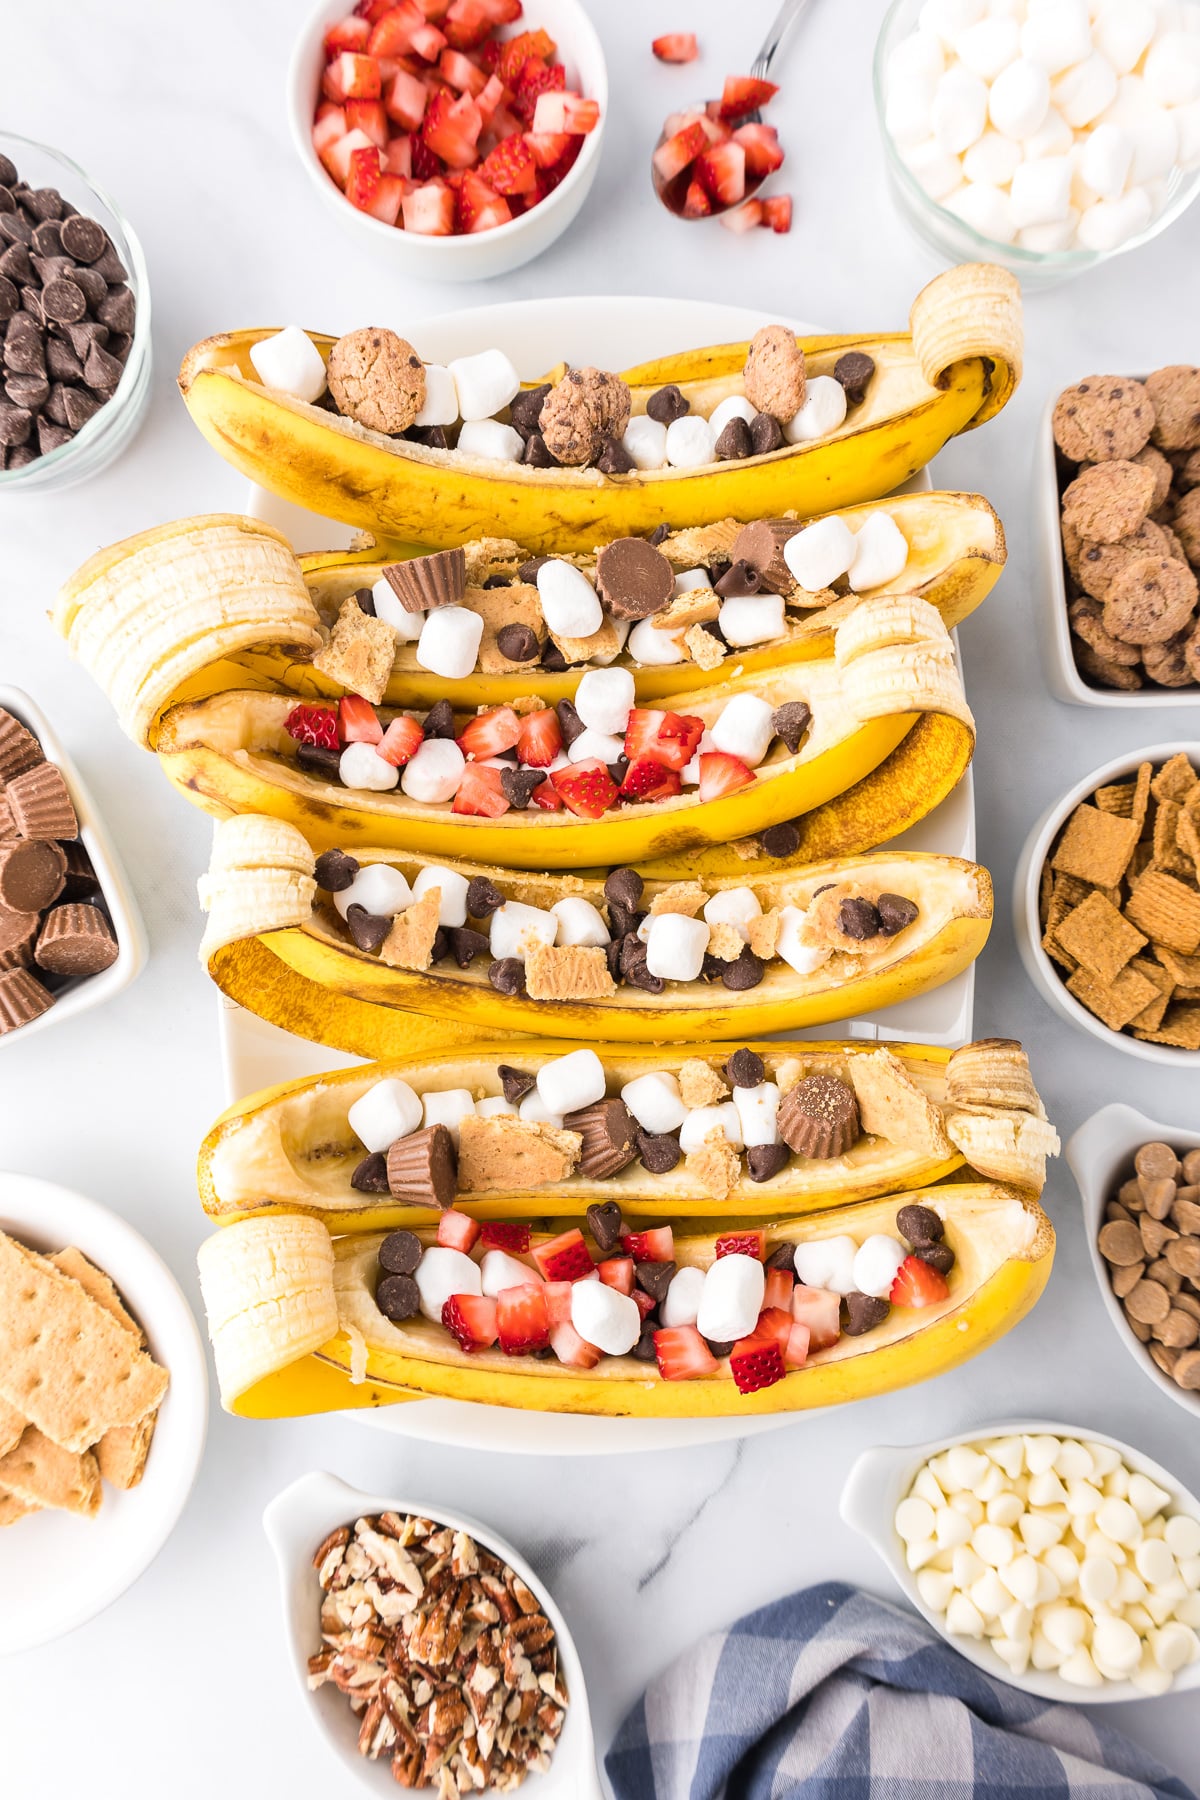 Six bananas hollowed out in a row filled with toppings like chocolate, marshmallows, peanut butter cups and strawberries pieces with more toppings in bowls nearby.